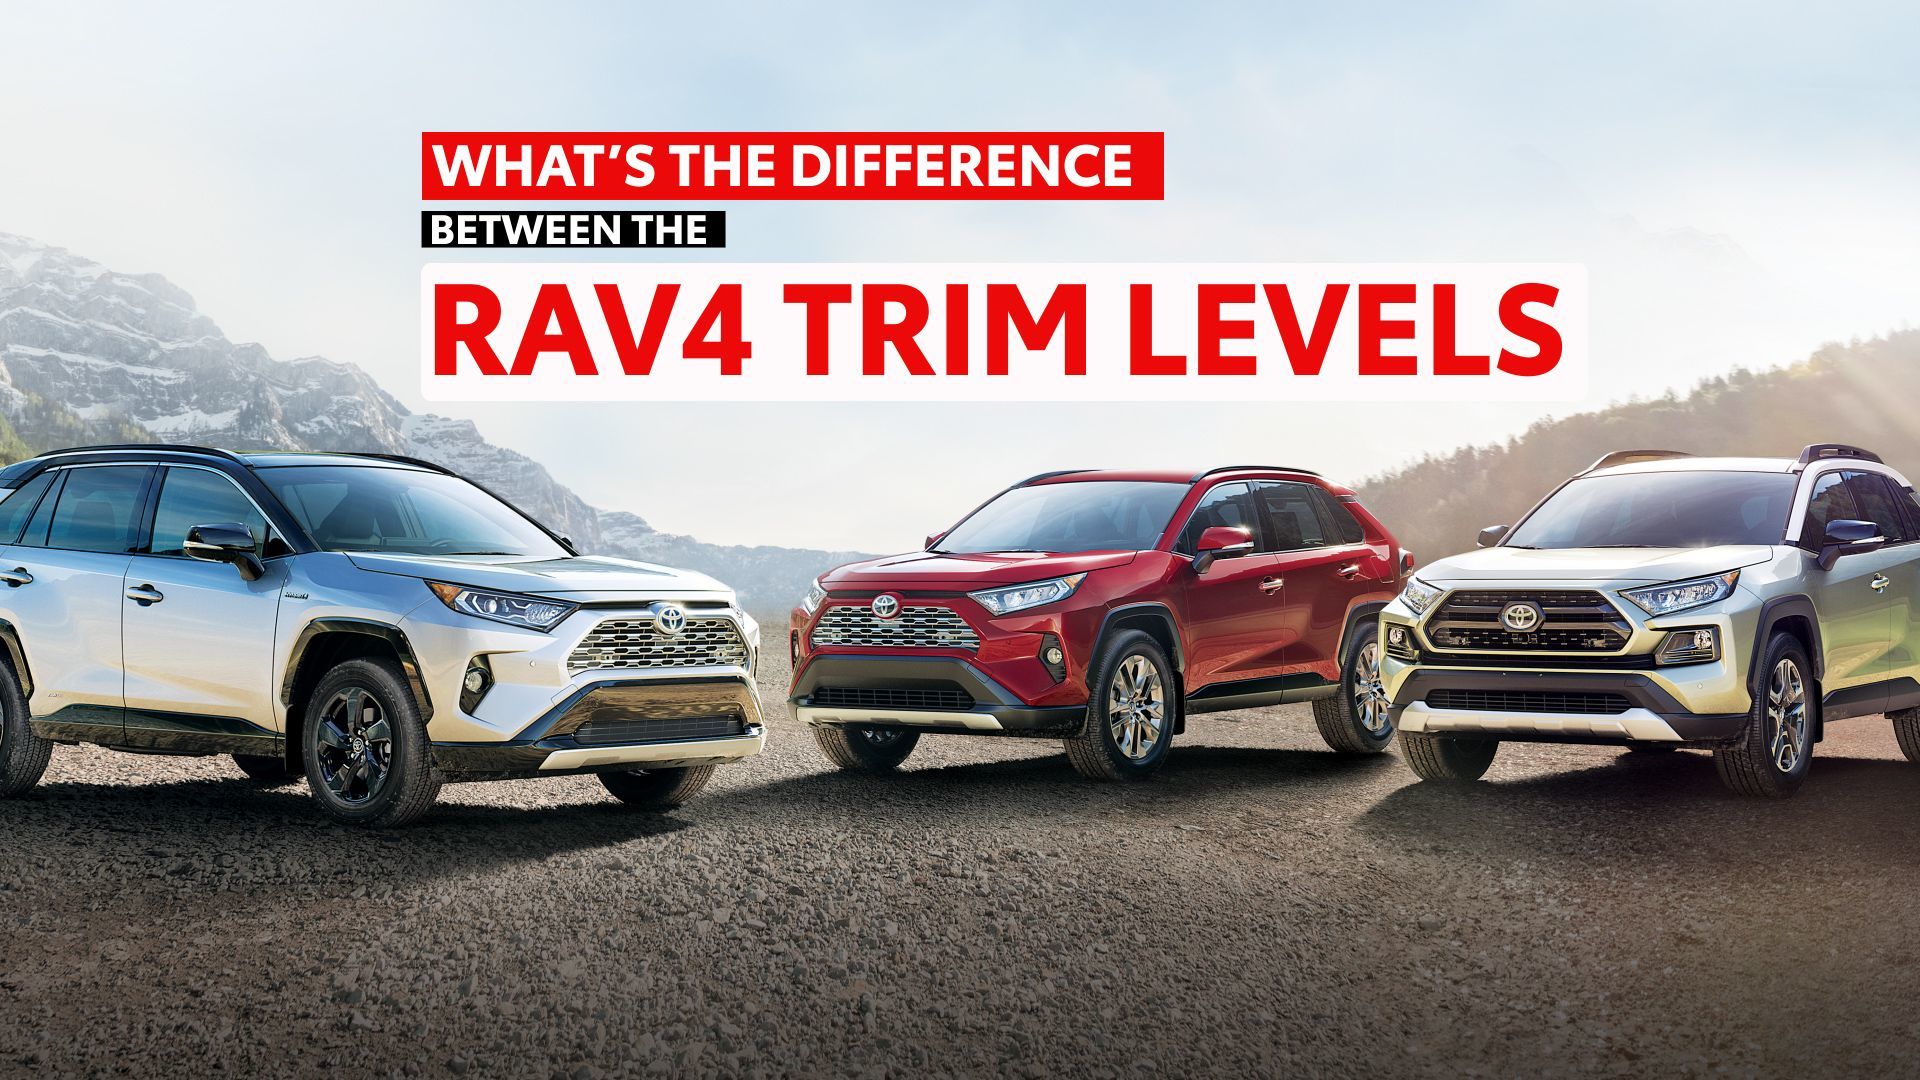 What's the Difference Between the RAV4 Trim Levels?